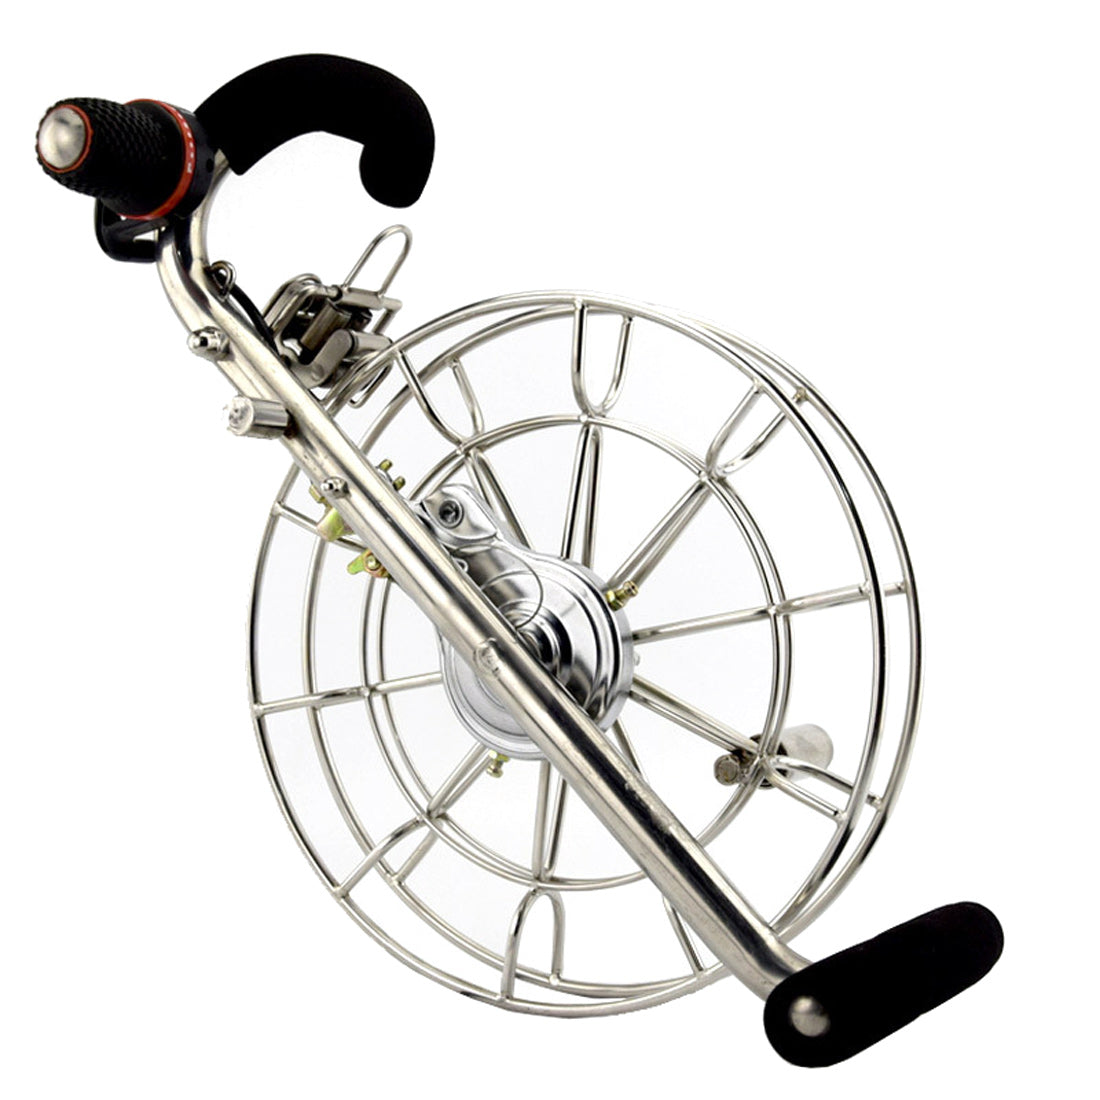 Strong Stainless Kite Line Winder Reel Brakes Control